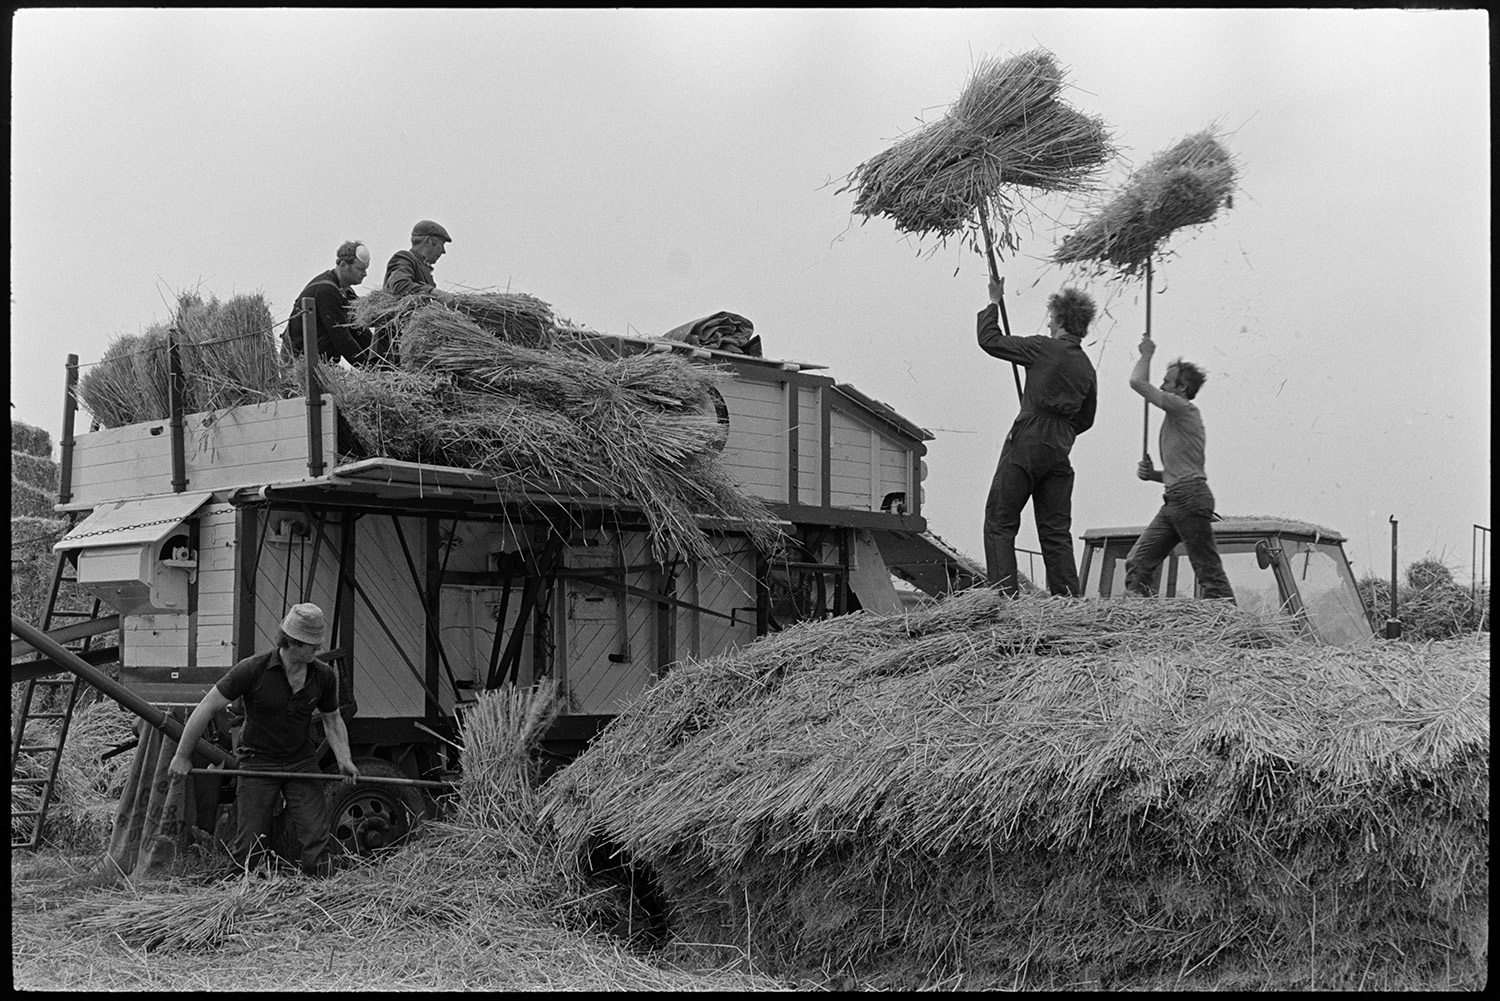 Reed comber at work, pile of ropes and spars. 
[Men dismantling a wheat rick and loading the reed into a reed comber, using pitchforks, in a field at Westacott Barton, Riddlecombe. Two of the men are holding bundles of reed above their heads on pitchforks.]